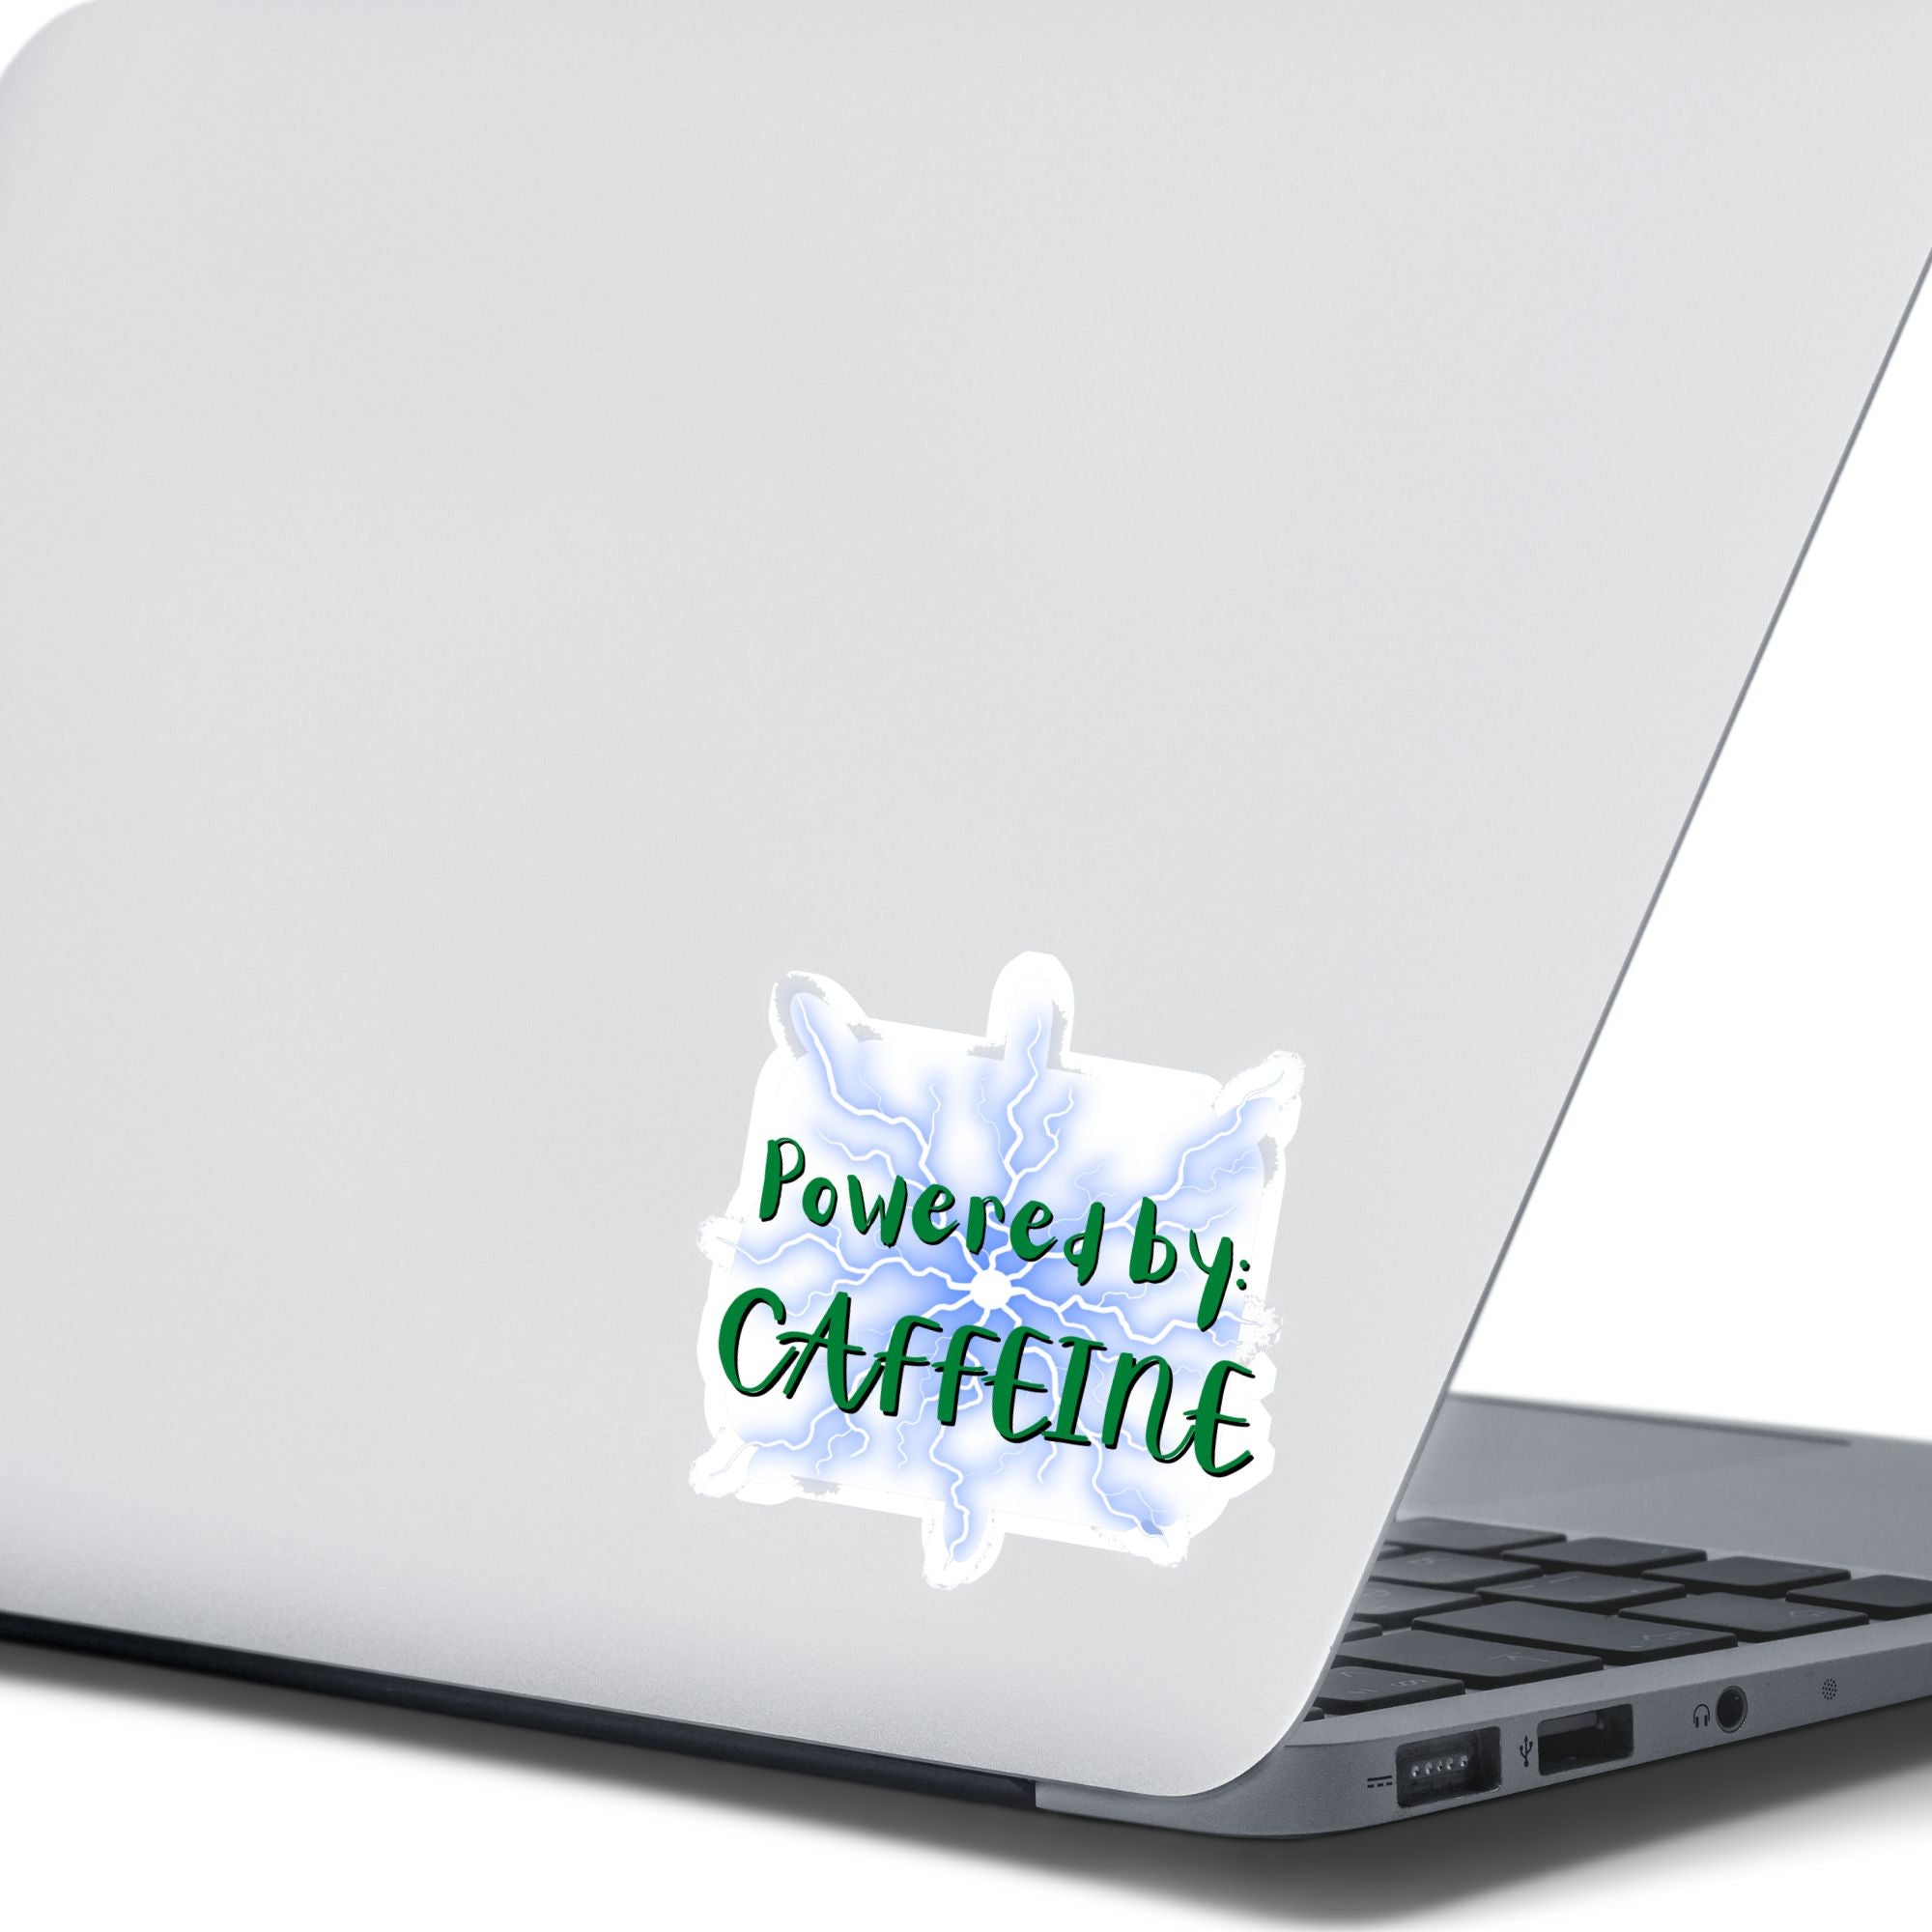 or those who like it, caffeine can be the magic elixir! This individual die-cut sticker has the words Powered by CAFFEINE in green over a background of blue electric/lightning bolts. This image shows the Powered by Caffeine sticker on the back of an open laptop.